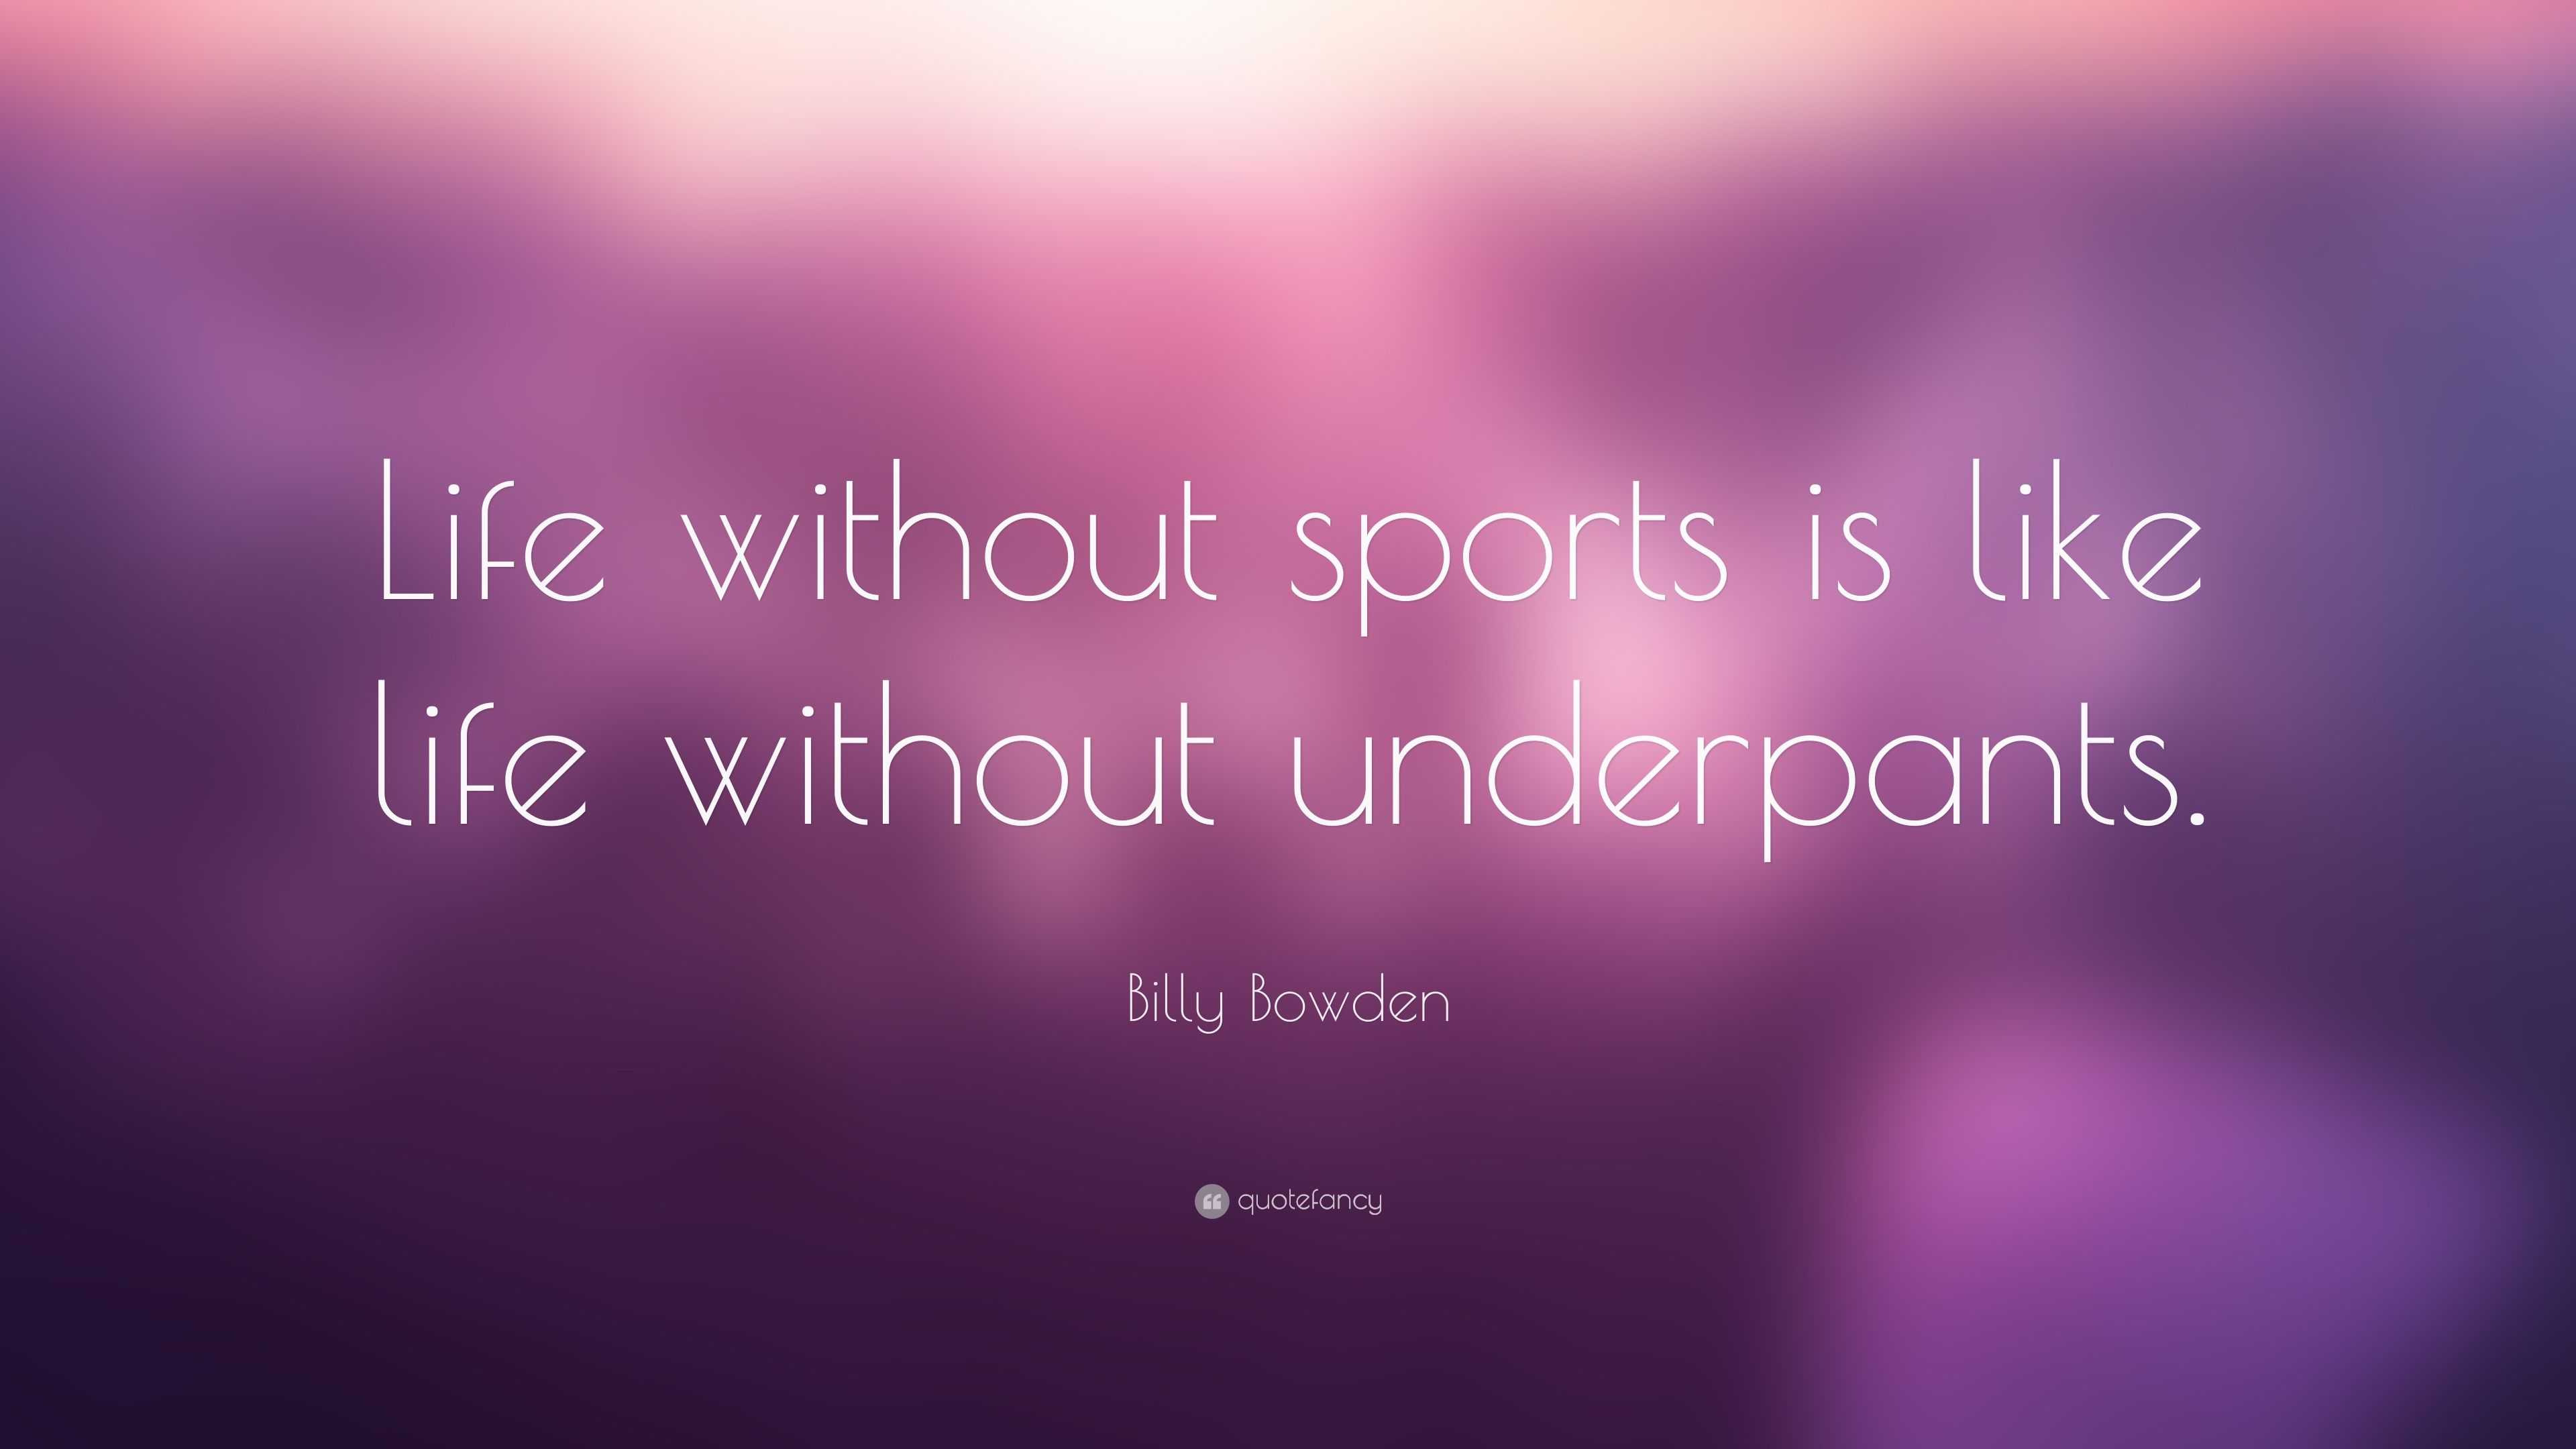 Billy Bowden Quote “Life without sports is like life without underpants ”